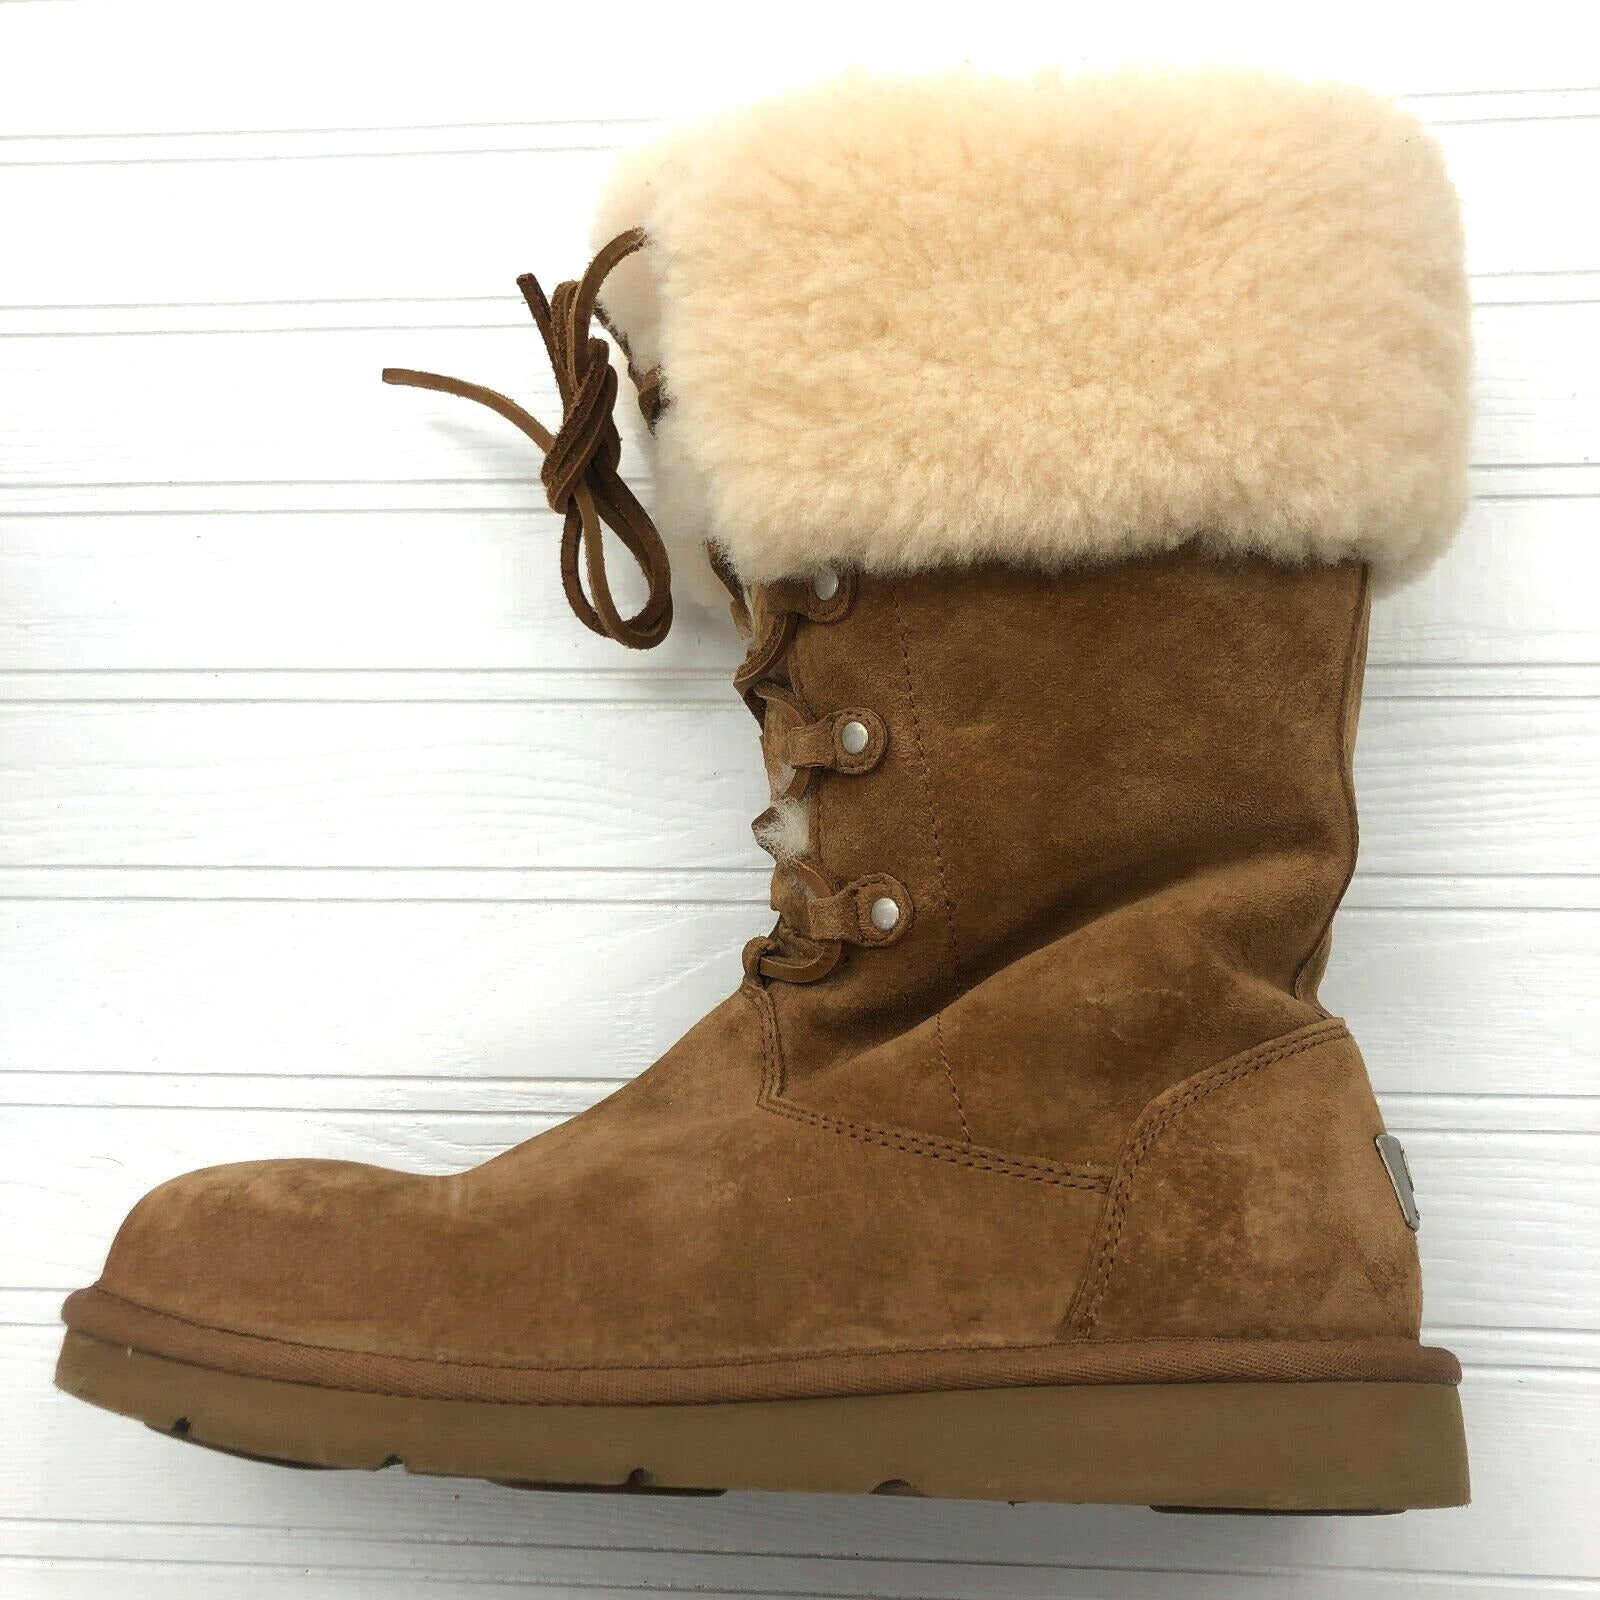 Ugg Tan Fur Lined Suede Full Lace Up Snow Boots Model 1892 Adult Size 8